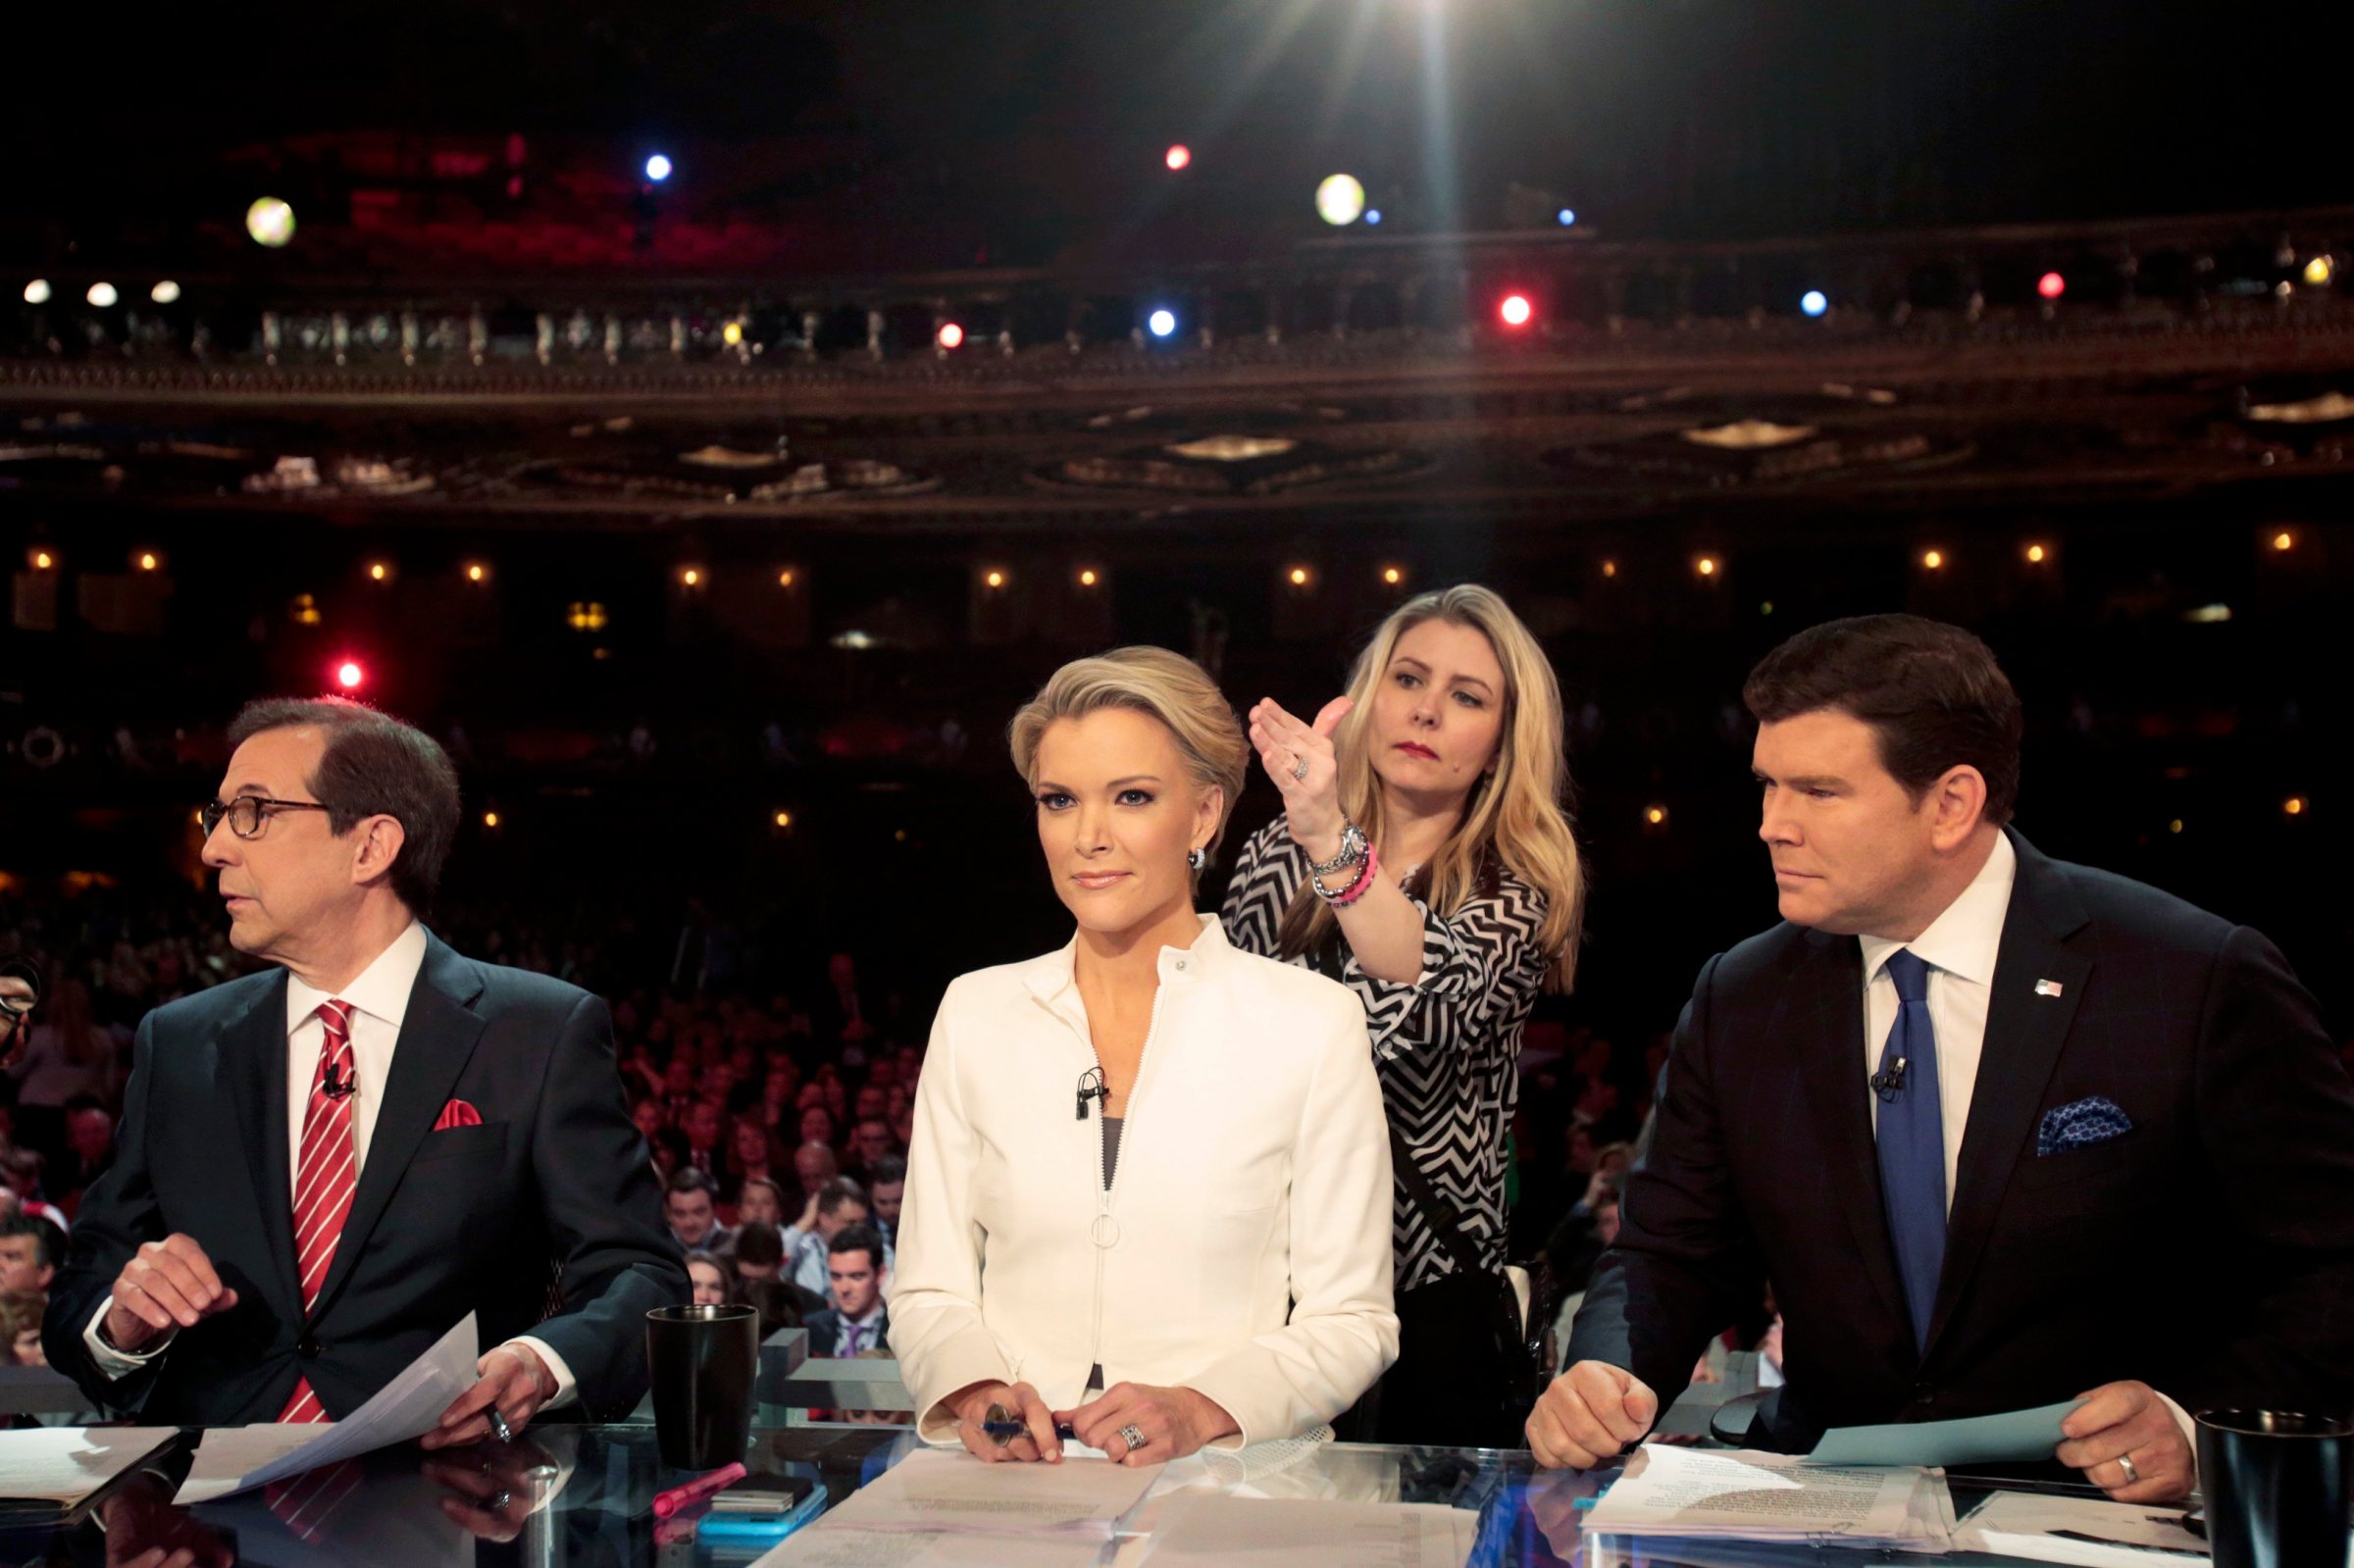 Fox News Channel anchors Wallace, Kelly and Baier prepare to moderate at the U.S. Republican presidential candidates debate in Detroit